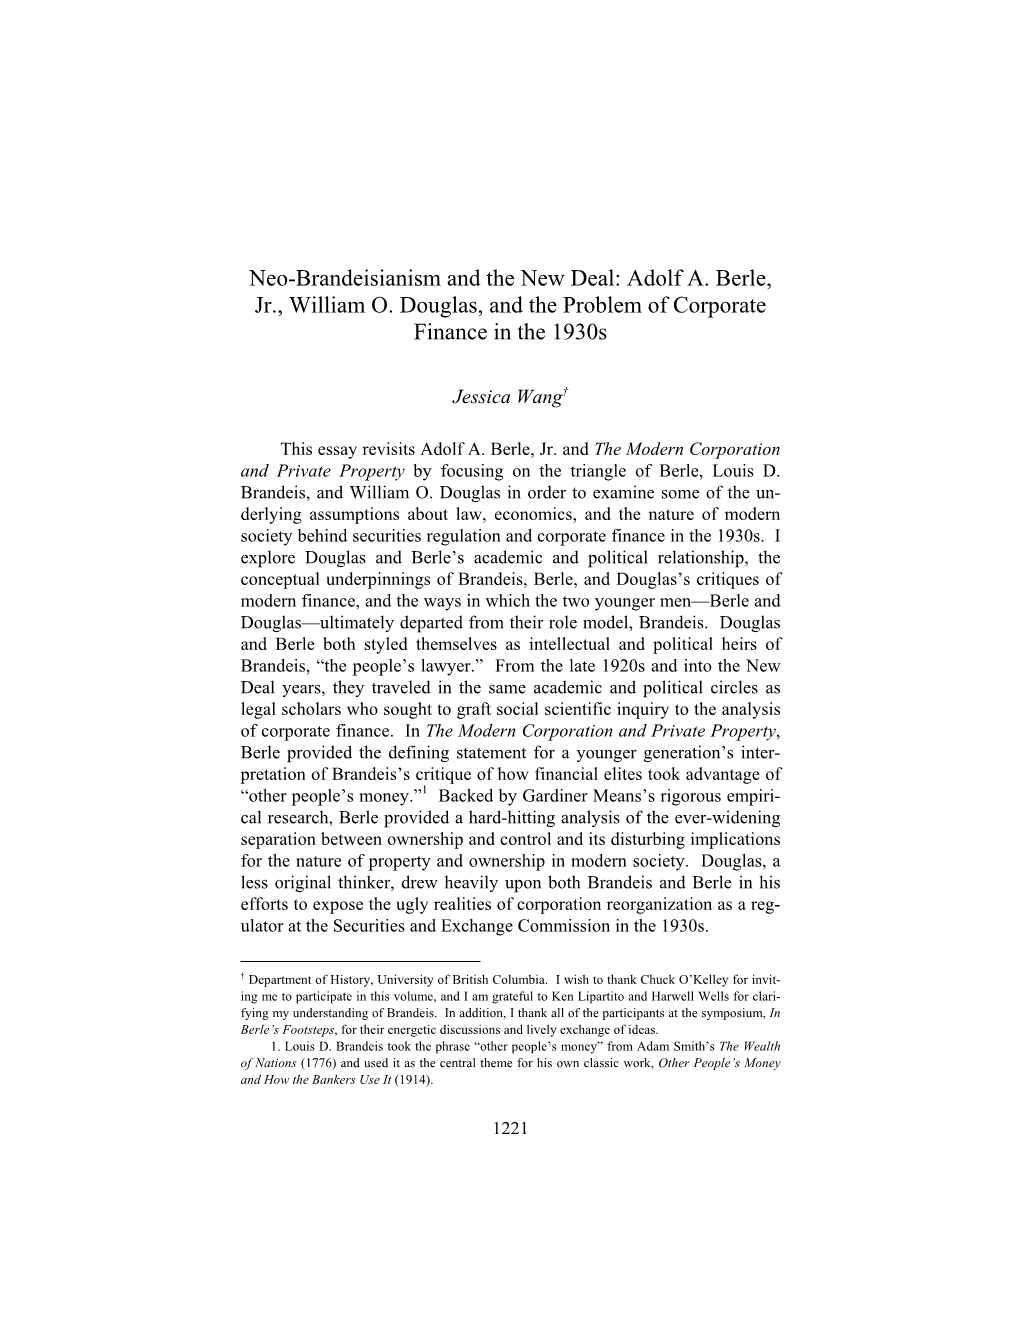 Neo-Brandeisianism and the New Deal: Adolf A. Berle, Jr., William O. Douglas, and the Problem of Corporate Finance in the 1930S